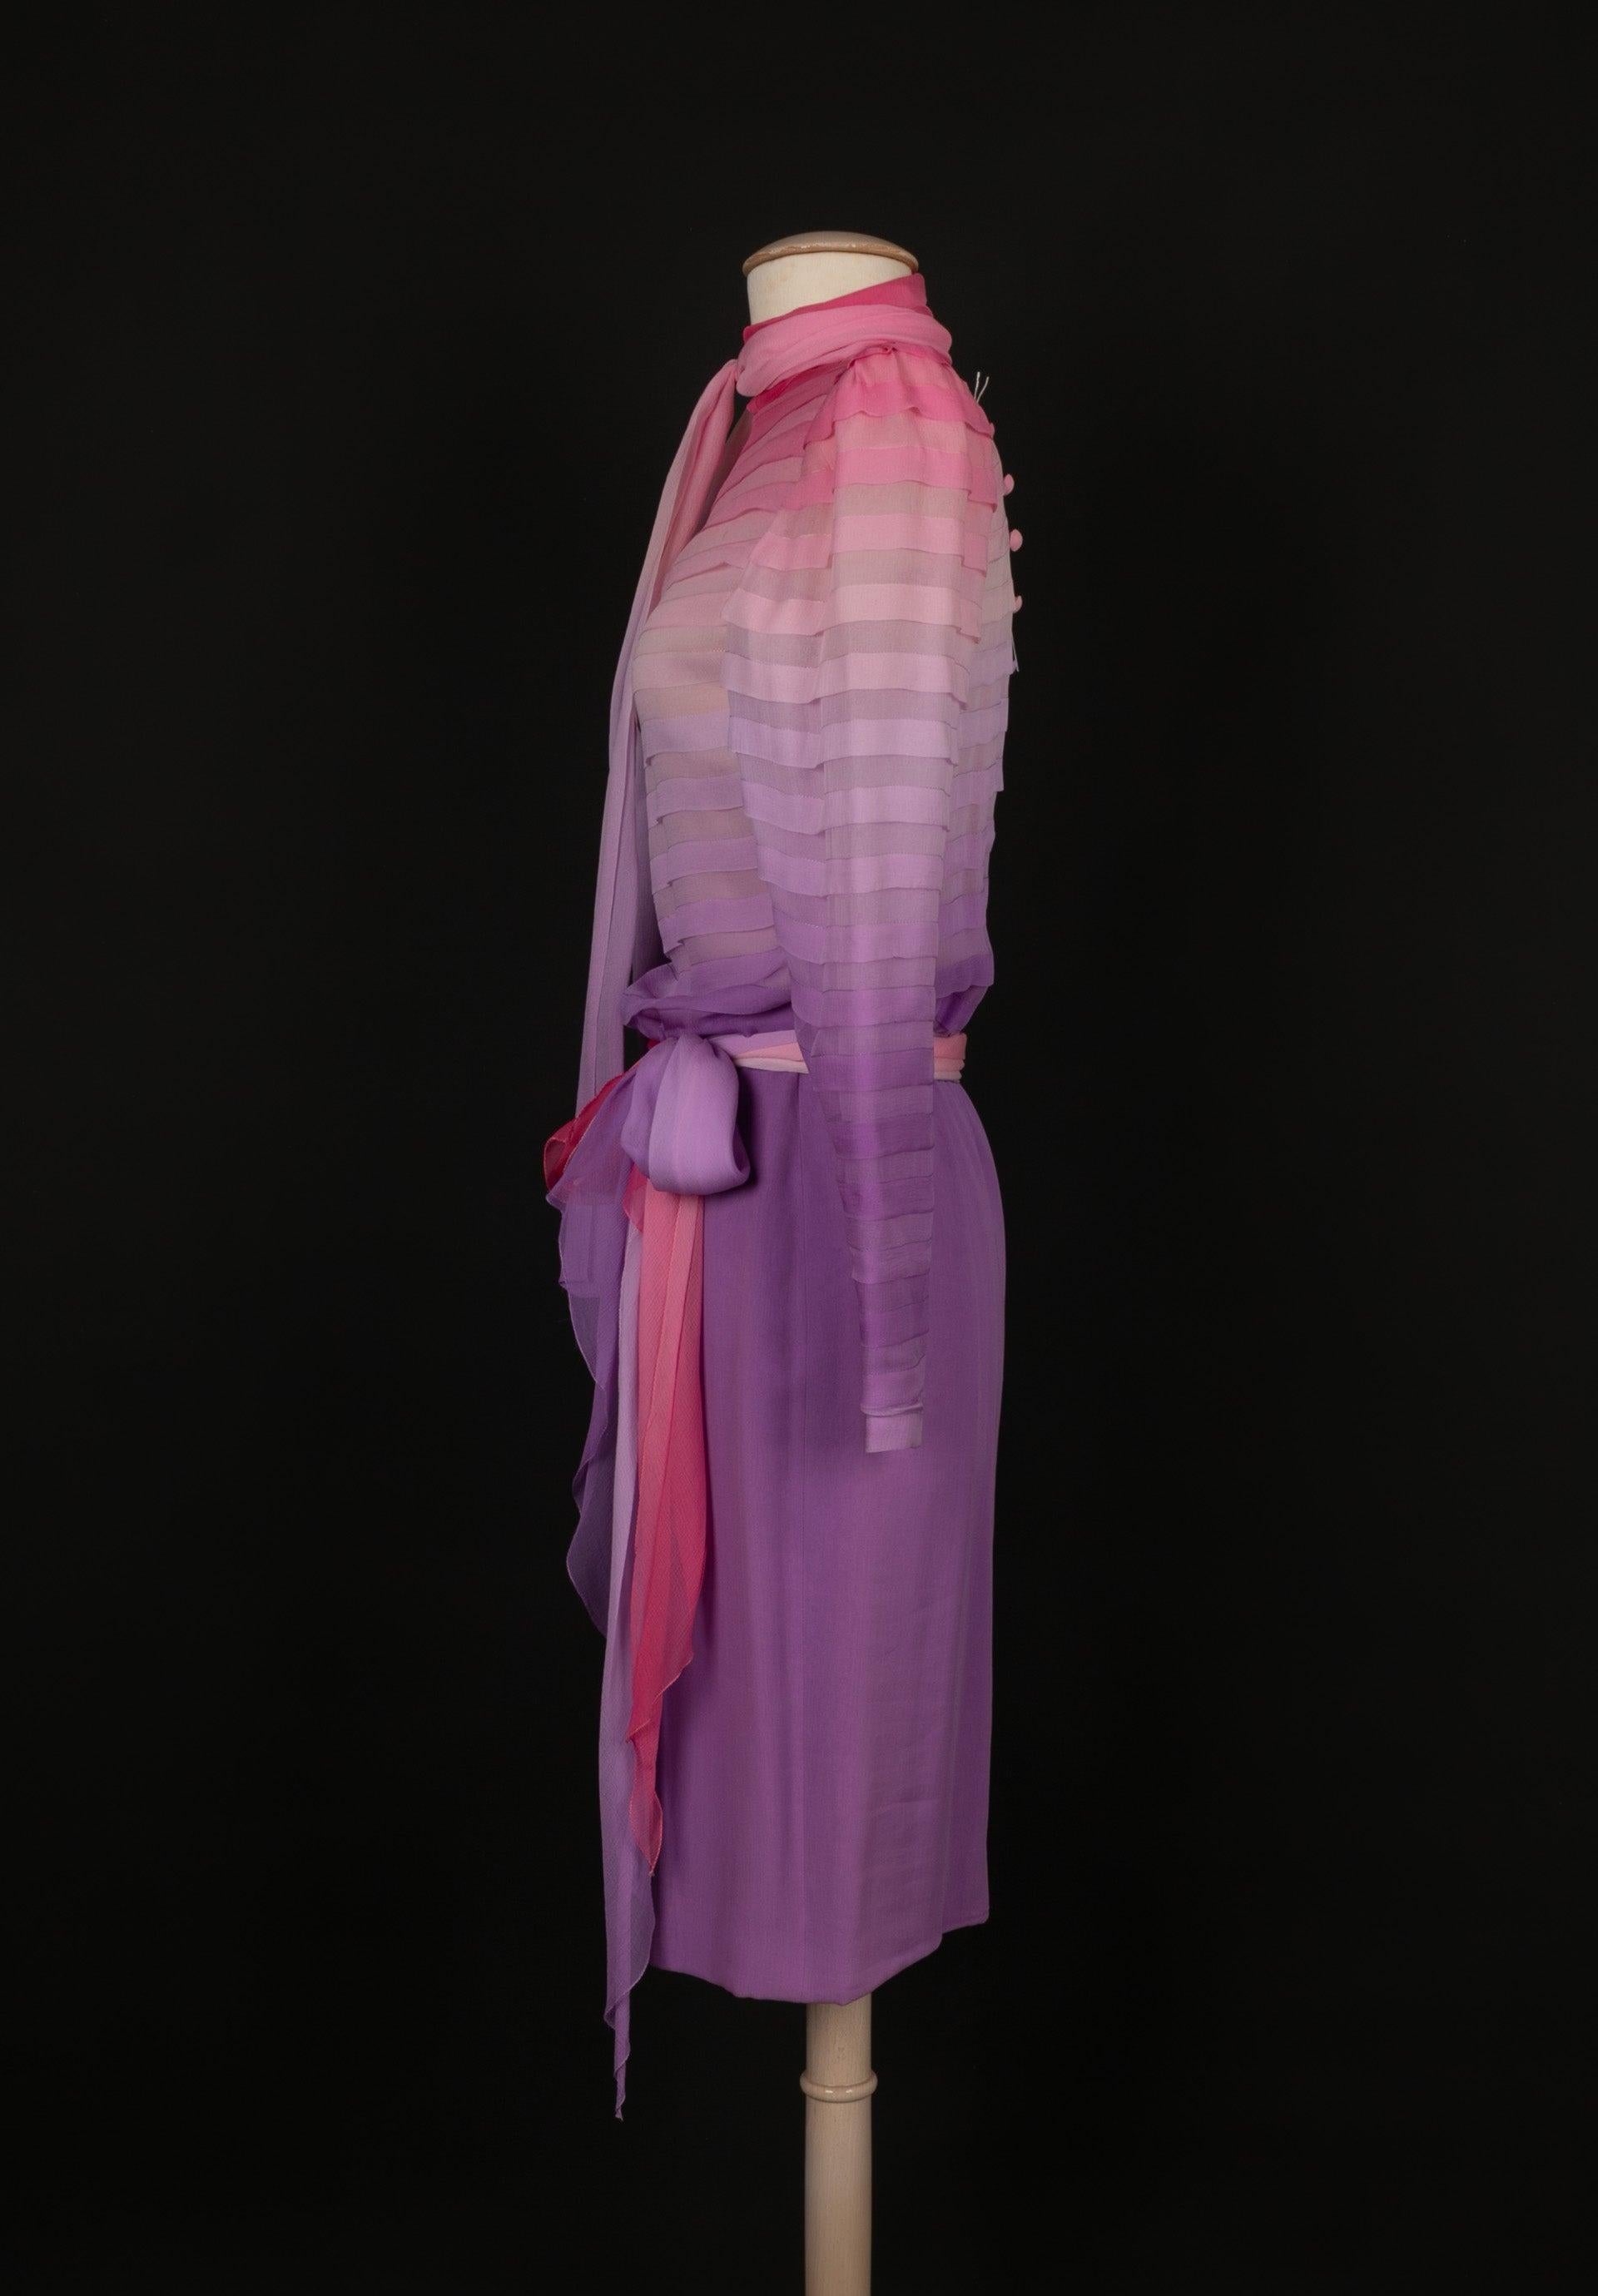 Jean-Louis Scherrer - (Made in France) Silk muslin dress in a gradation of pink and purple. An ascot tie is included. Bodice with tiny flounces. Haute Couture piece from the 1980s. Size and composition label missing, it fits a 34FR/36FR.

Additional